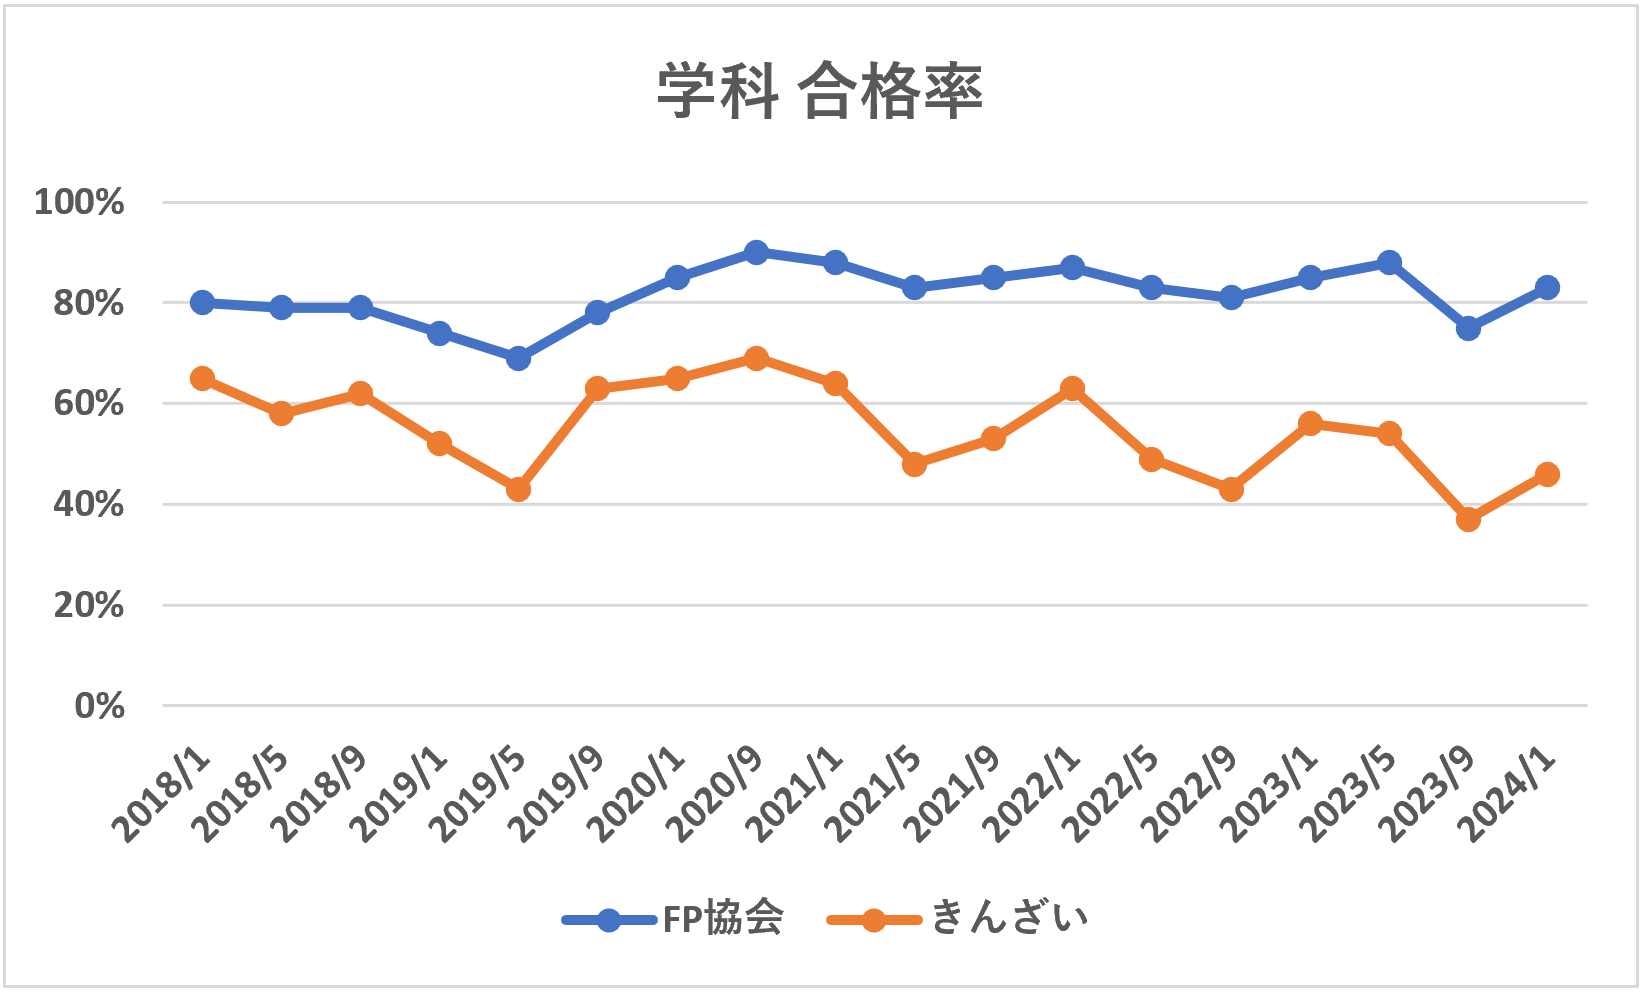 FP3級学科試験合格率推移（2018年1月から2024年1月まで）